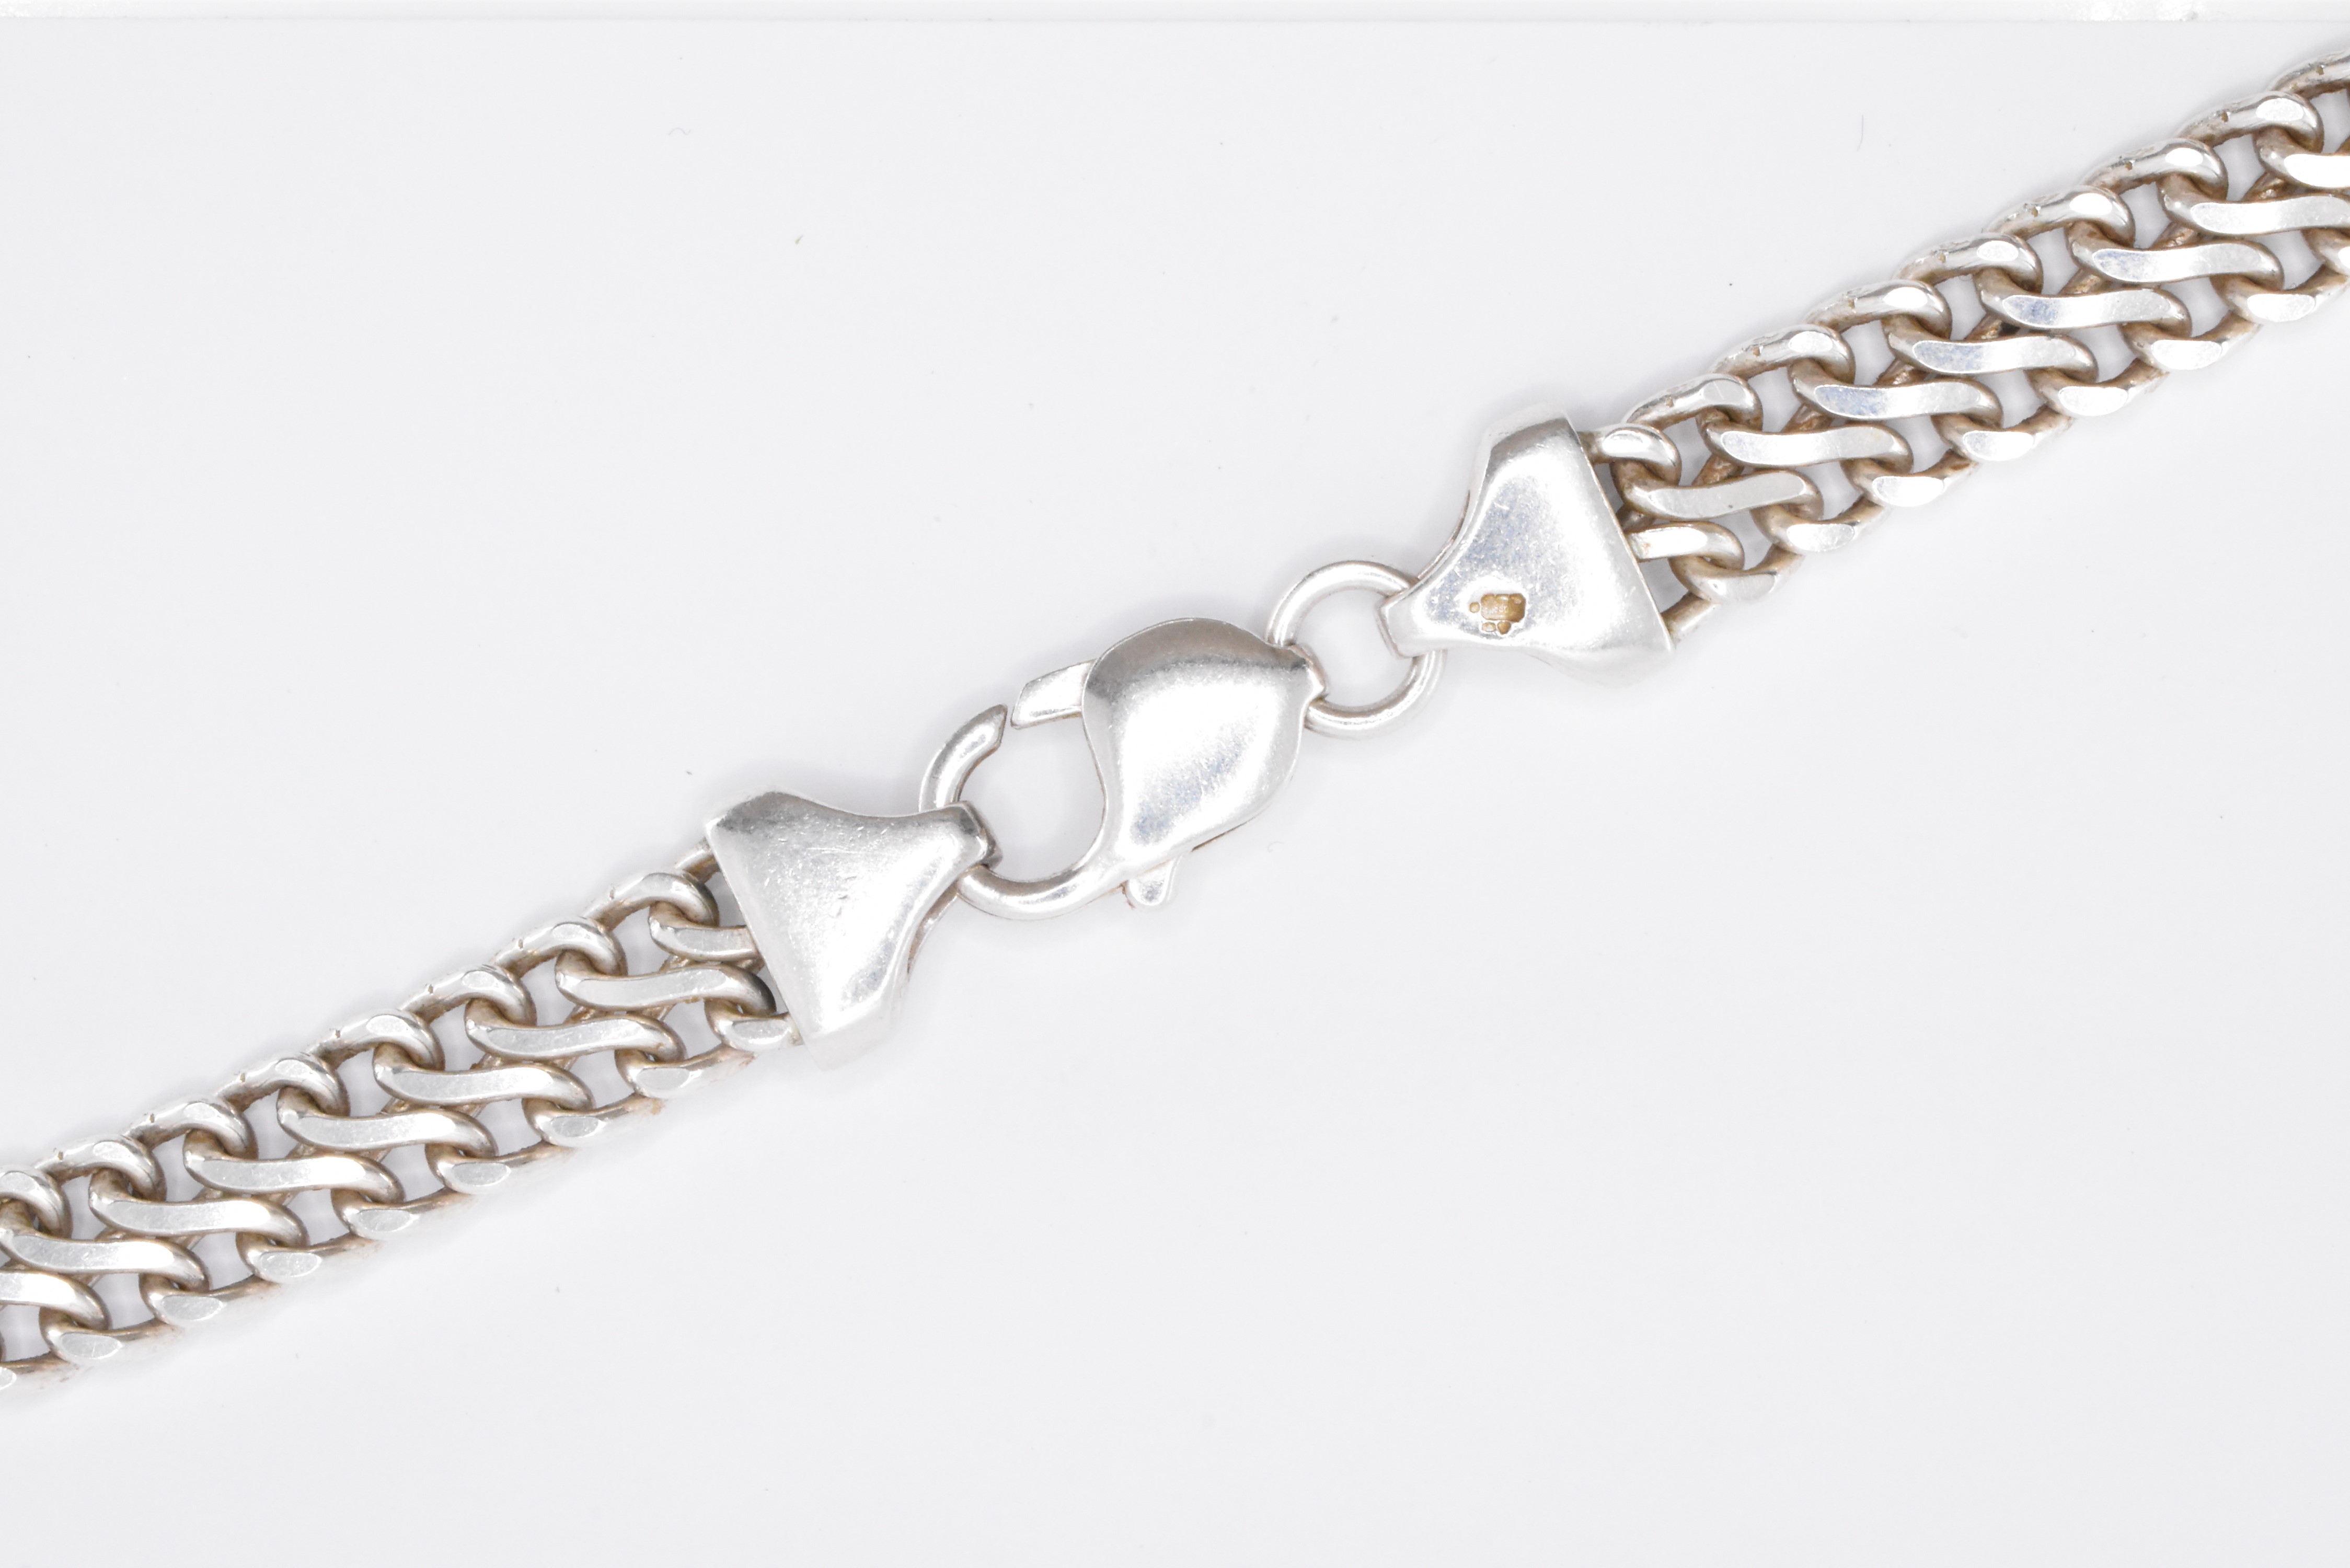 SILVER FANCY LINK NECKLACE CHAIN - Image 5 of 6